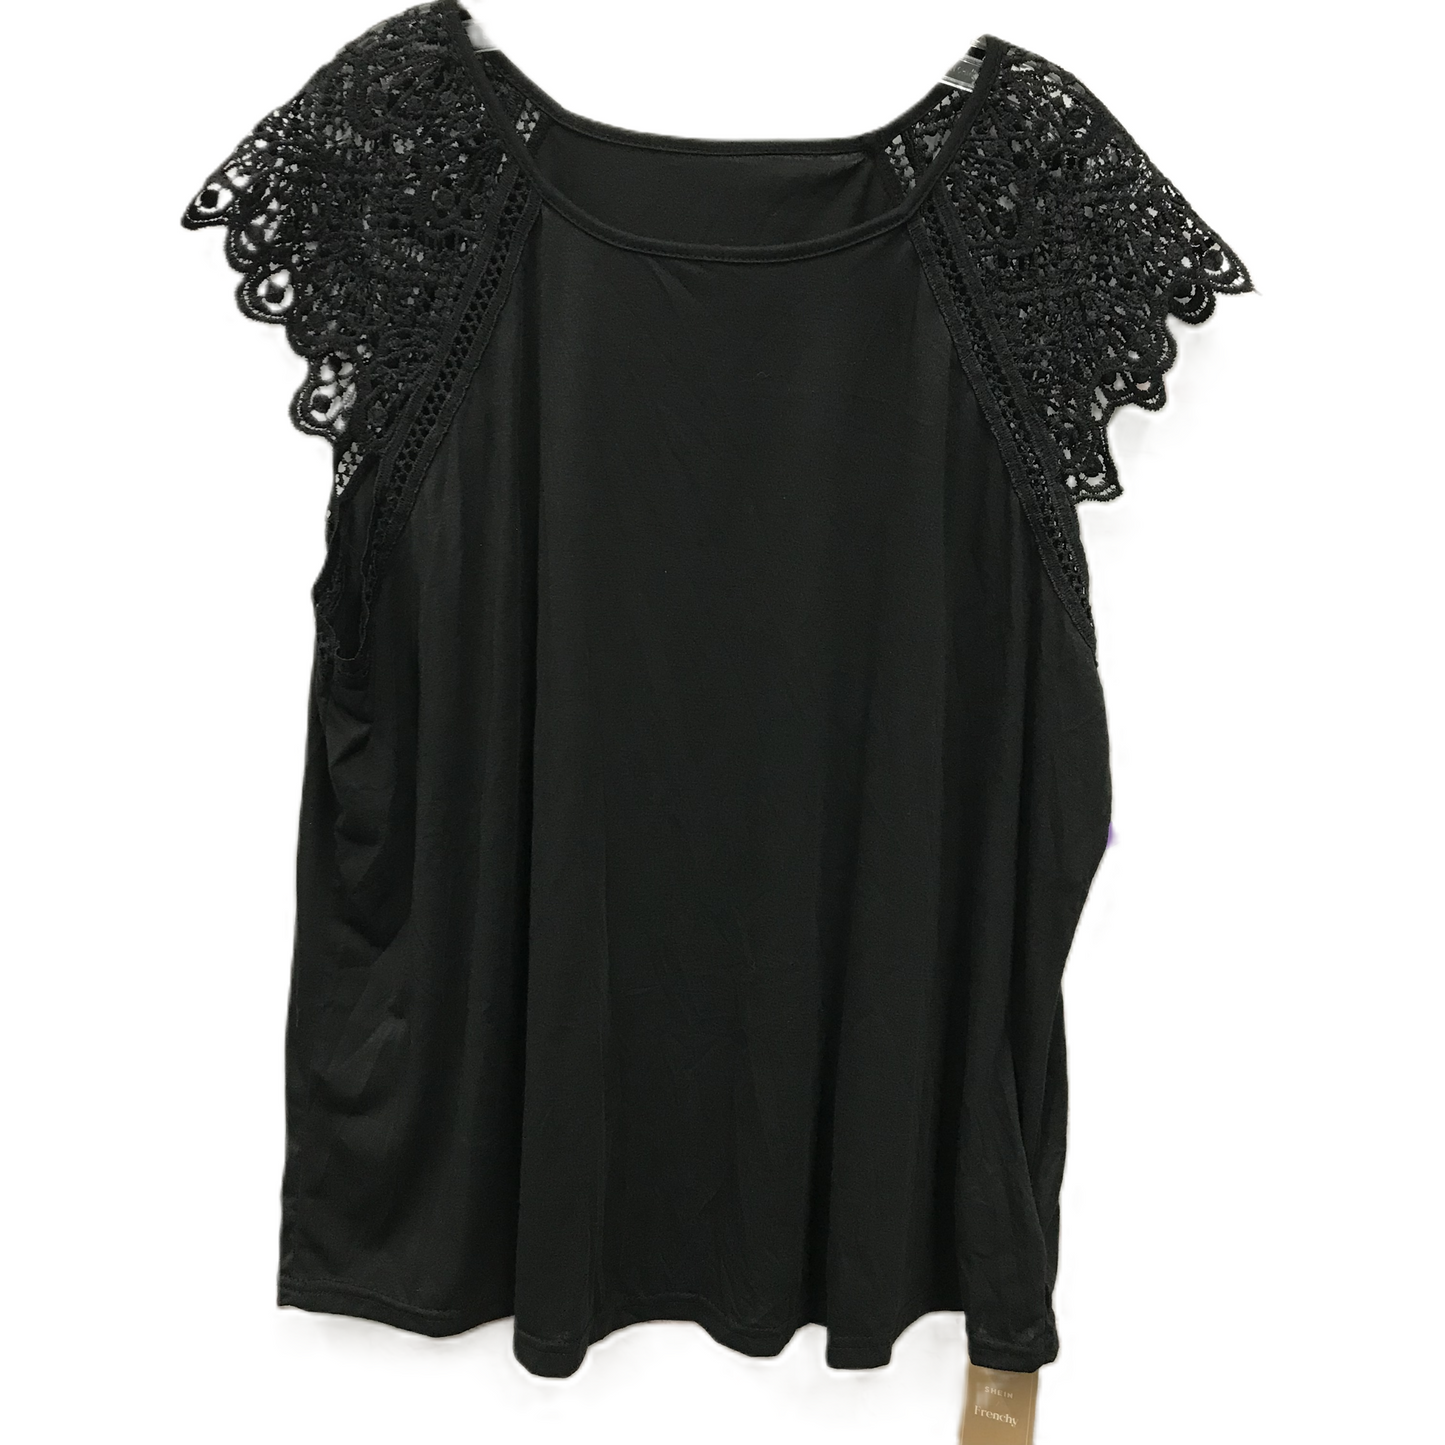 Black Top Short Sleeve By Shein, Size: 4x